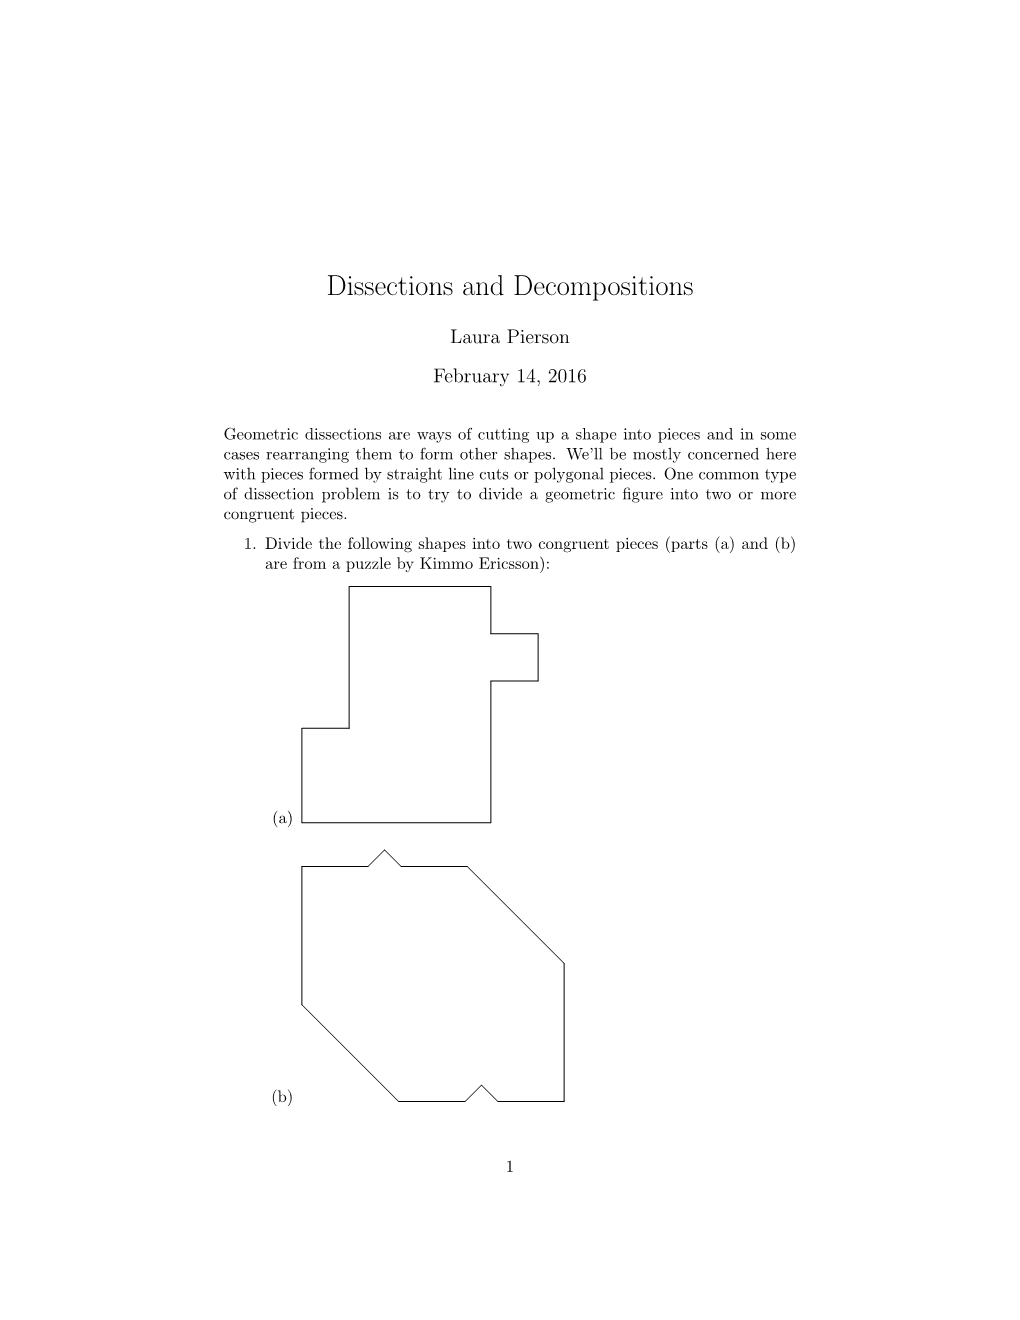 Dissections and Decompositions